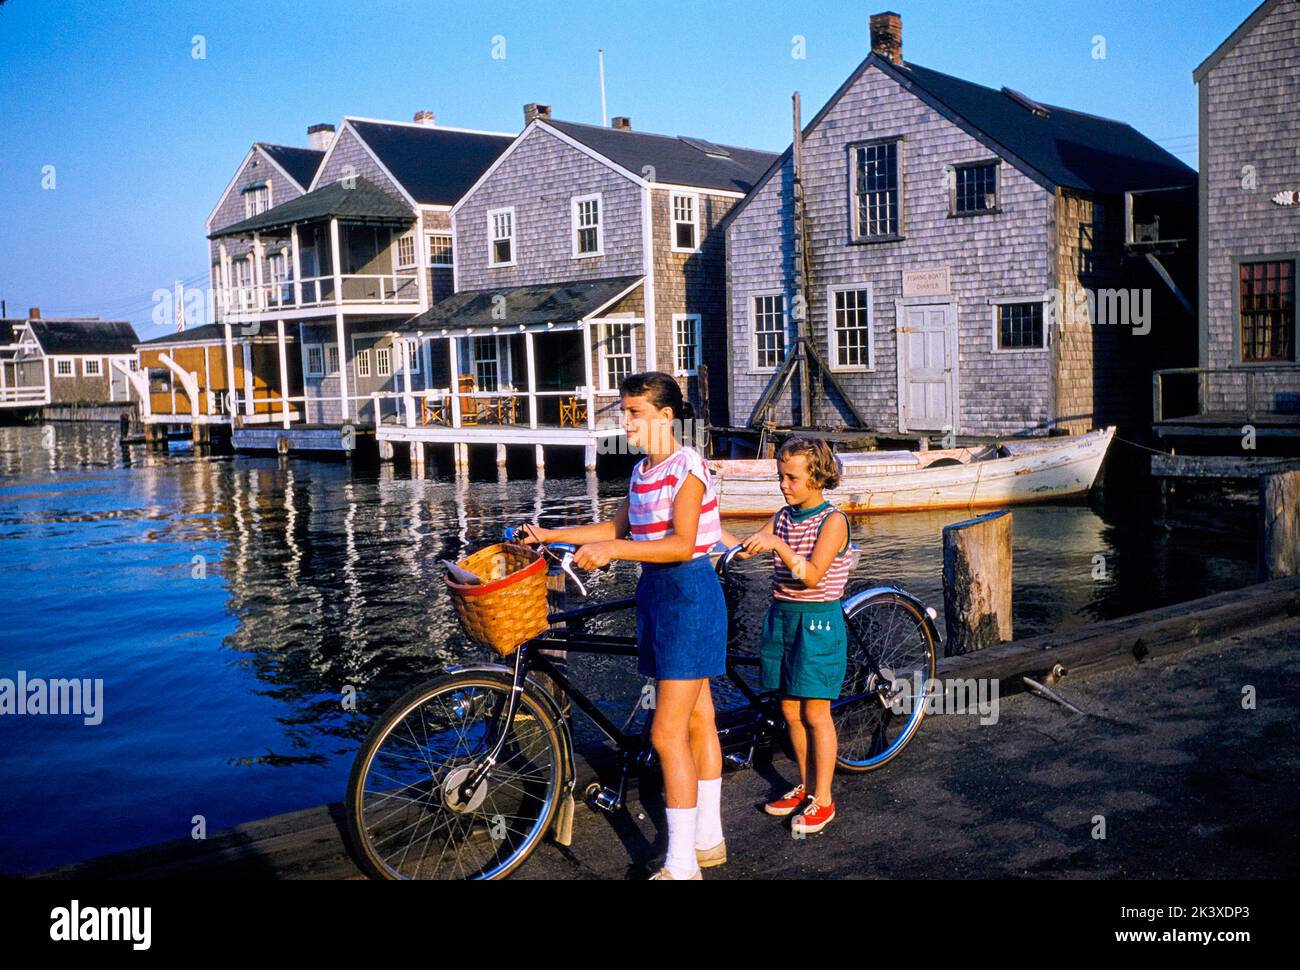 Two Young Girls with Tandem Bicycle, Nantucket, Massachusetts, USA, Toni Frissell Collection, September 1957 Stock Photo